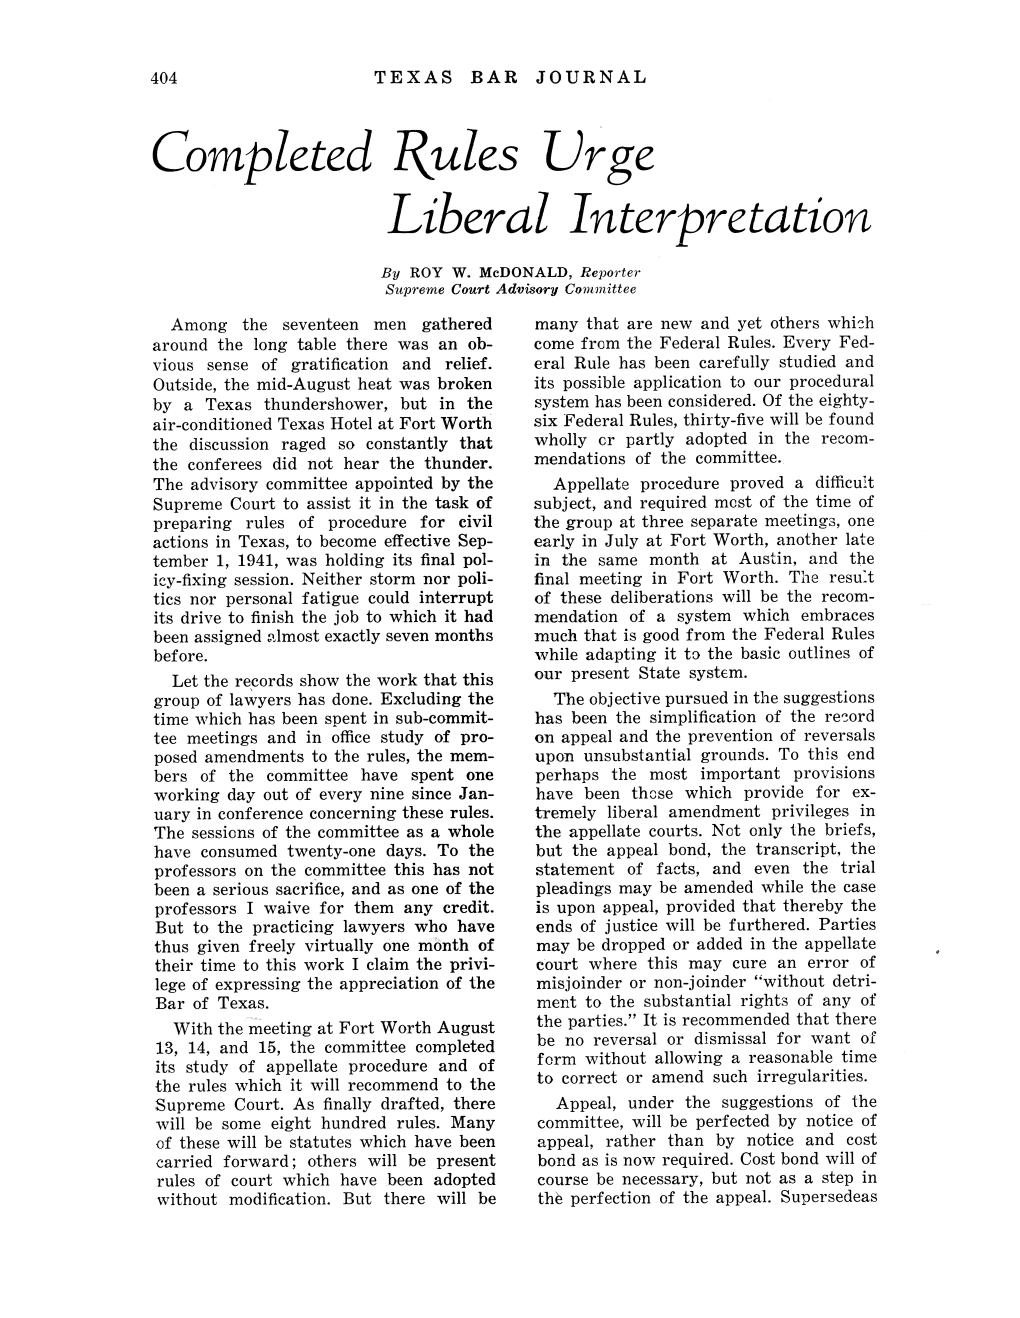 Completed Rules Urge Liberal Interpretation by Roy W. Mcdonald